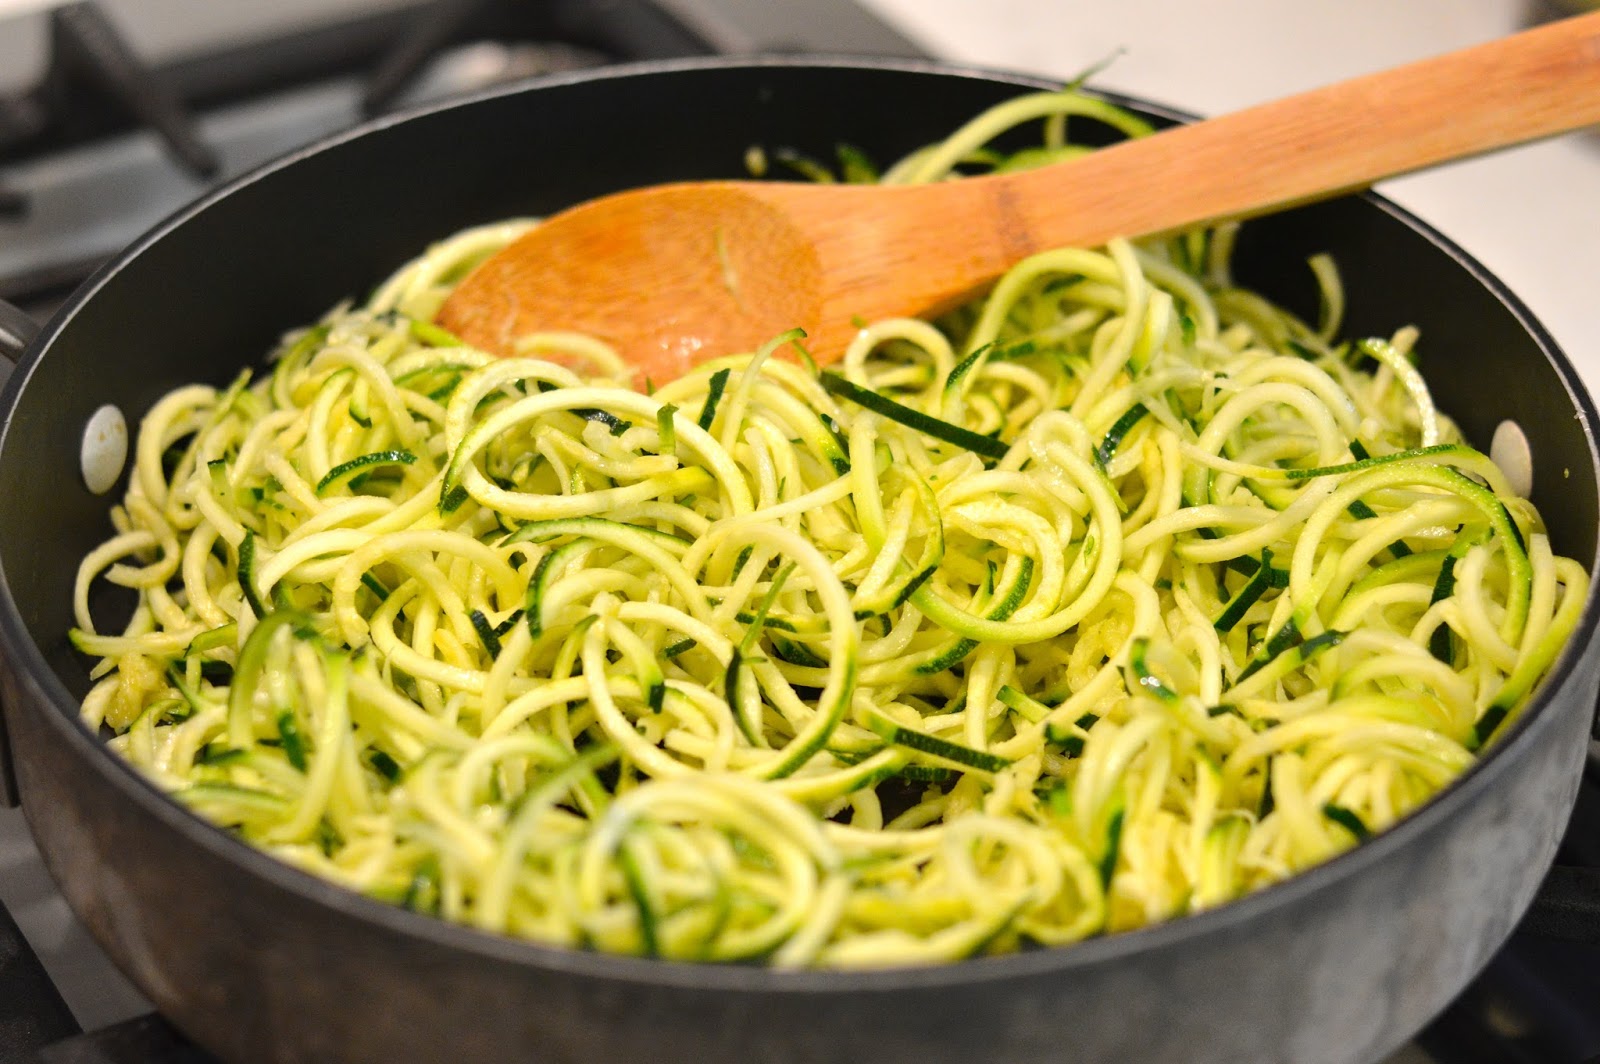 Healthy Dinner Idea: How to Make Zoodles - A Blonde's Moment